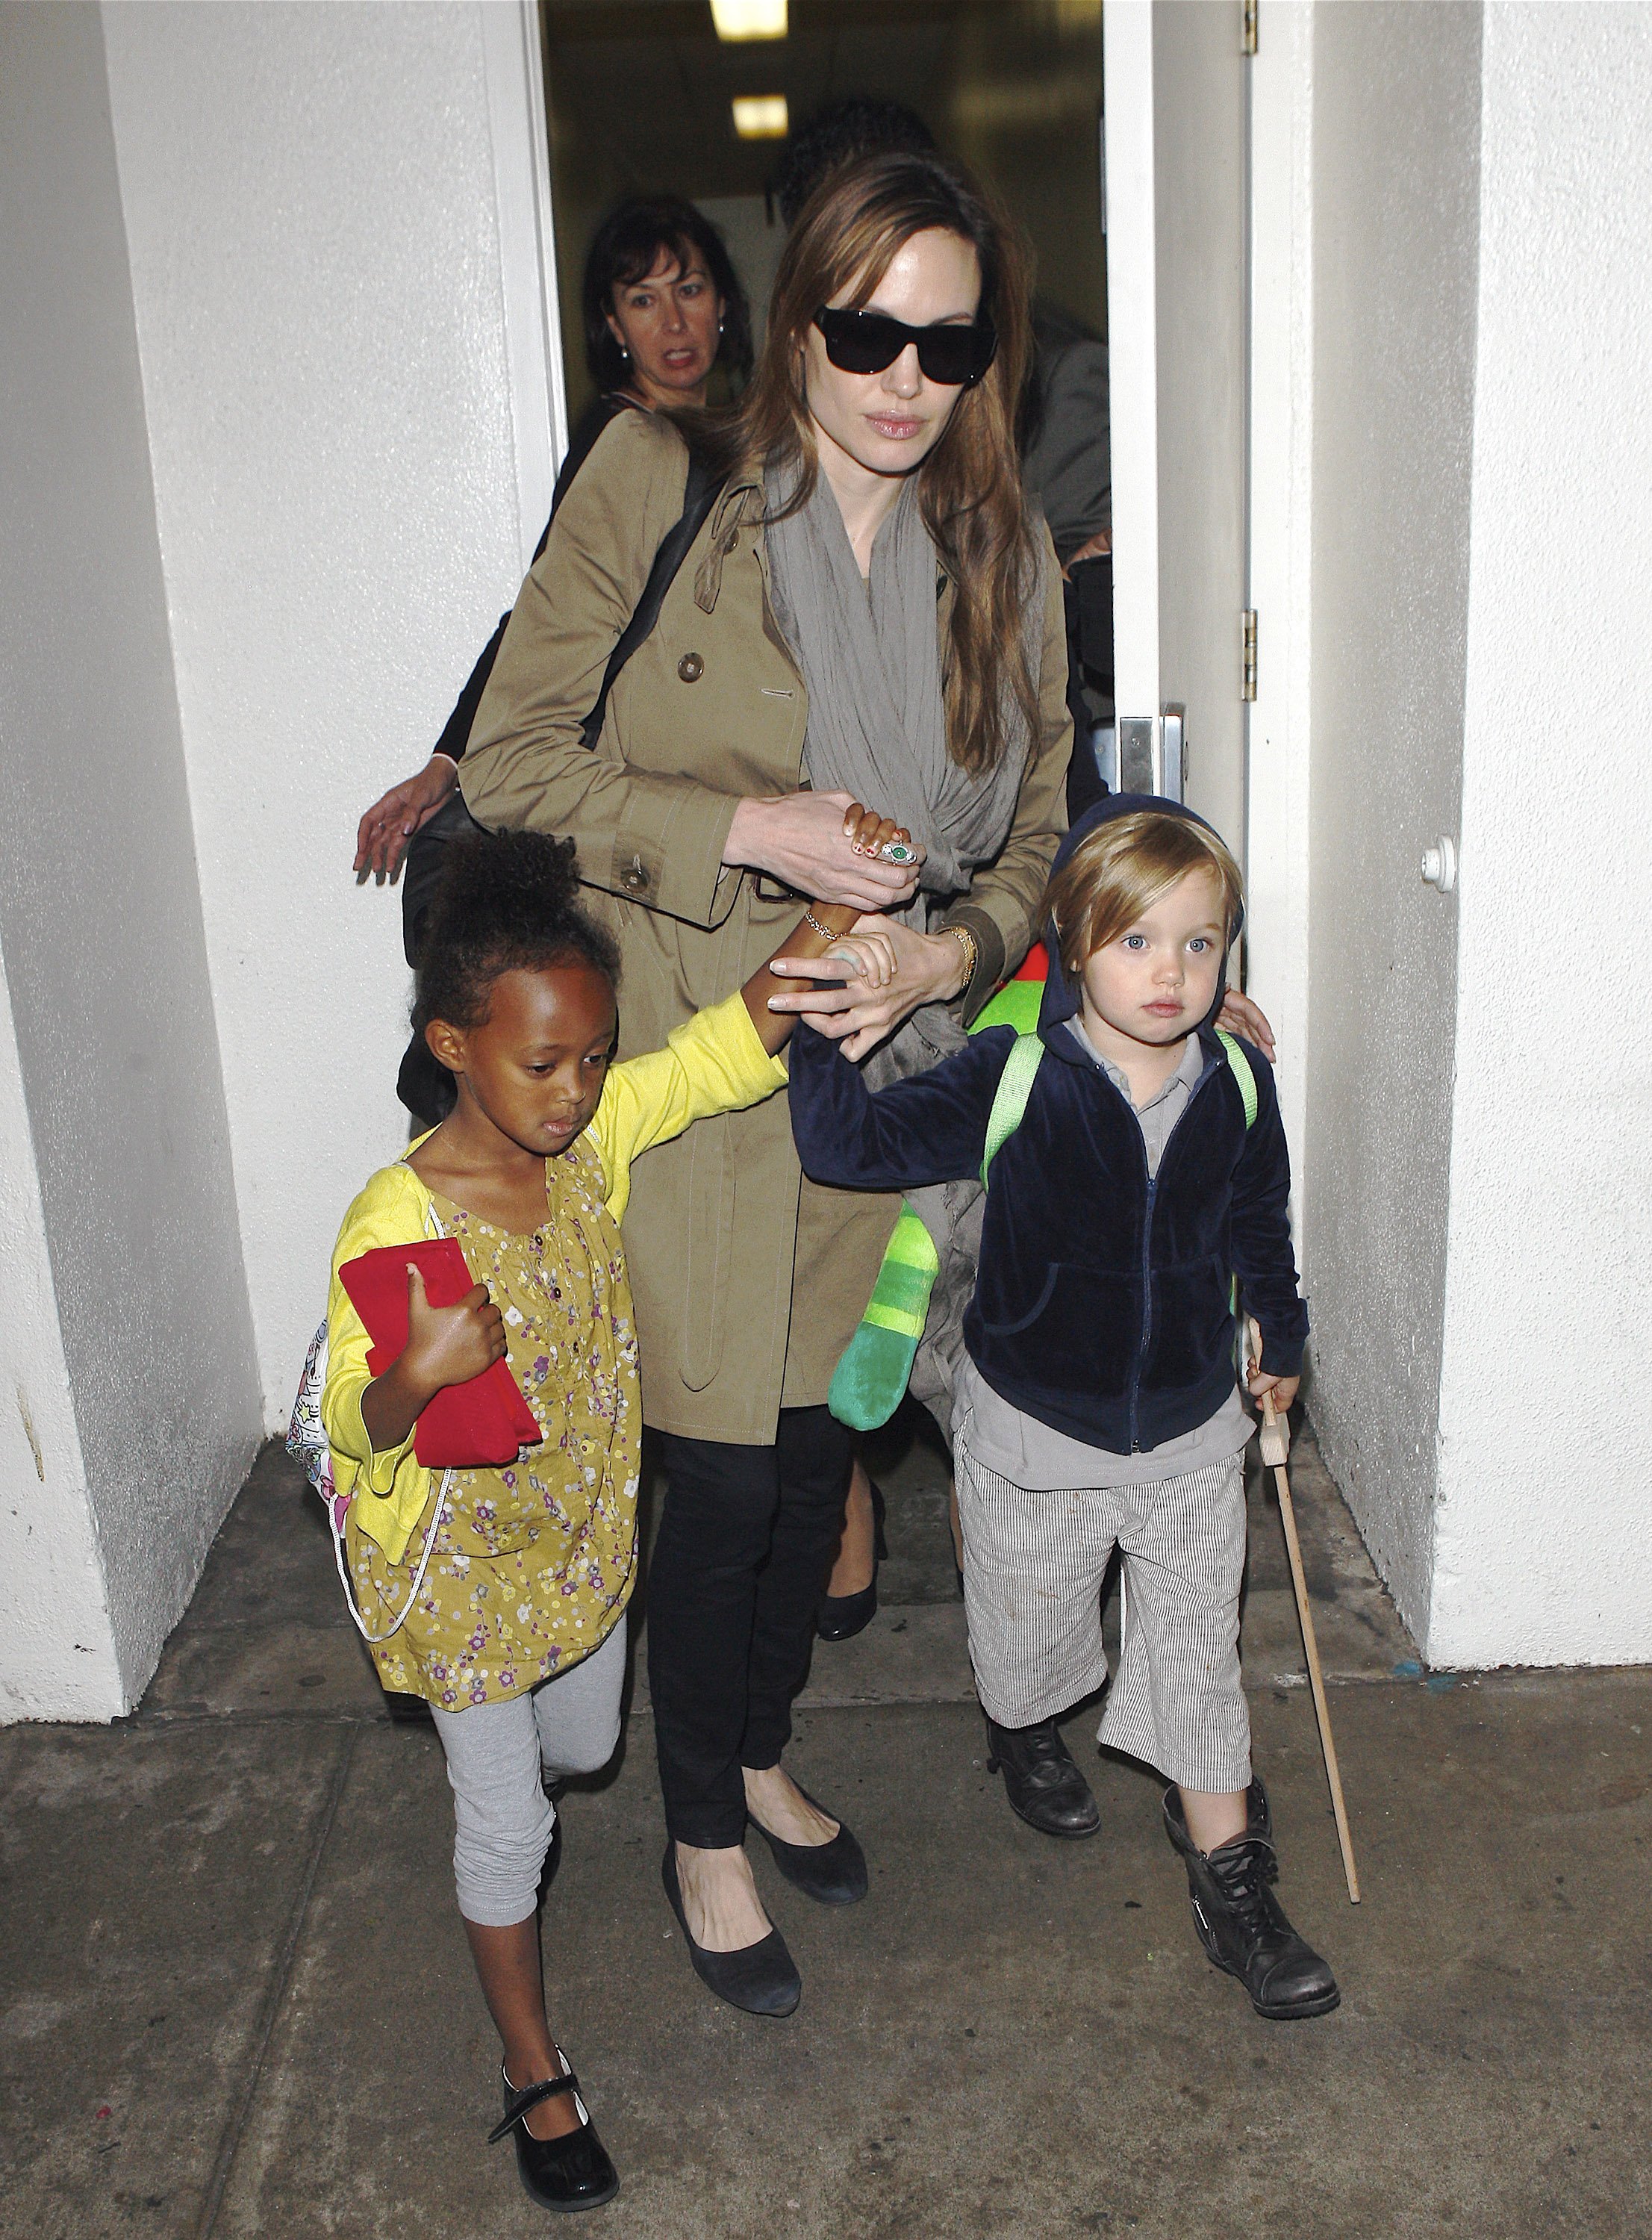 Angelina Jolie, Shiloh, and Zahara Jolie-Pitt seen at LAX Airport on September 18, 2010, in Los Angeles, California | Source: Getty Images